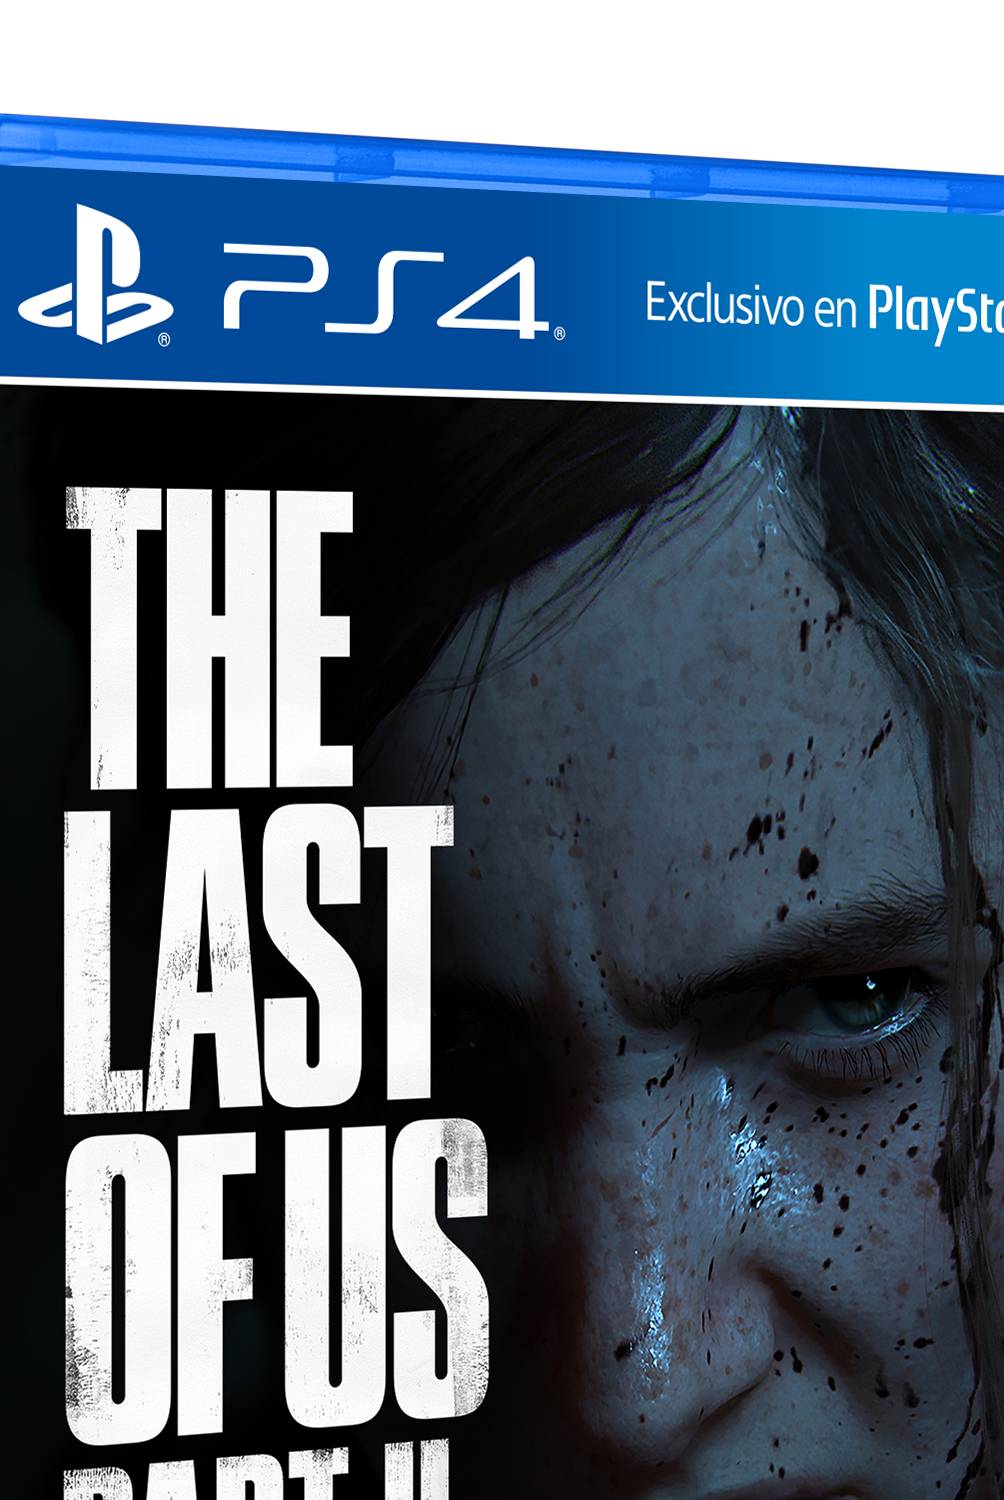 PLAYSTATION - The Last Of Us 2 Ps4 Playstation